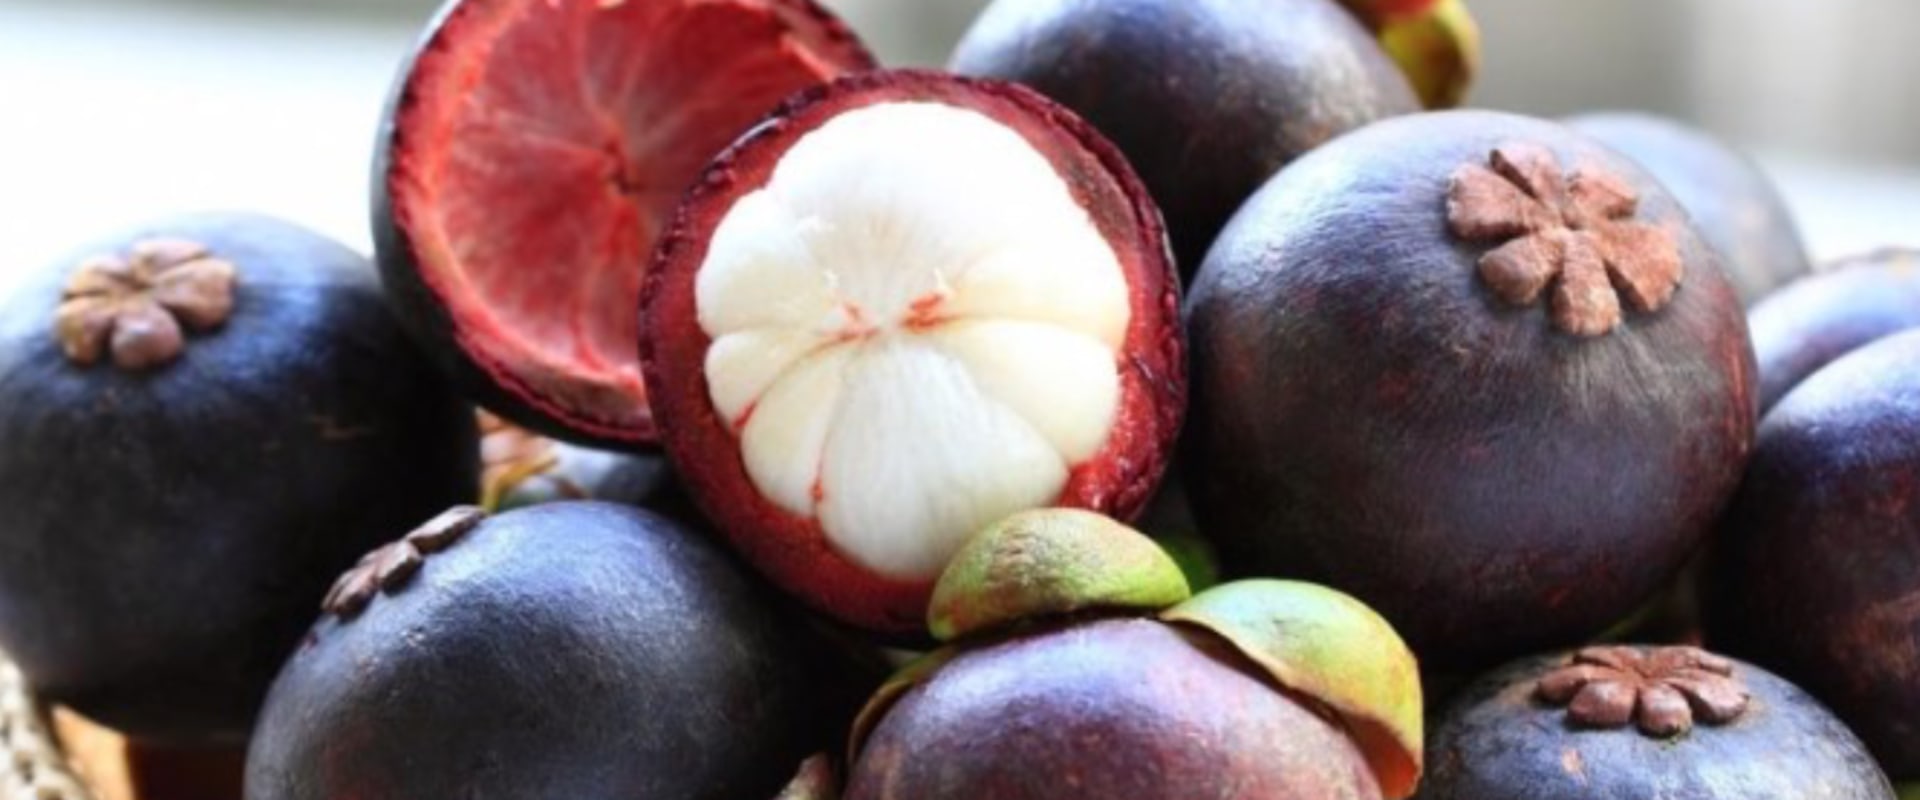 Are mangosteens illegal in the us?